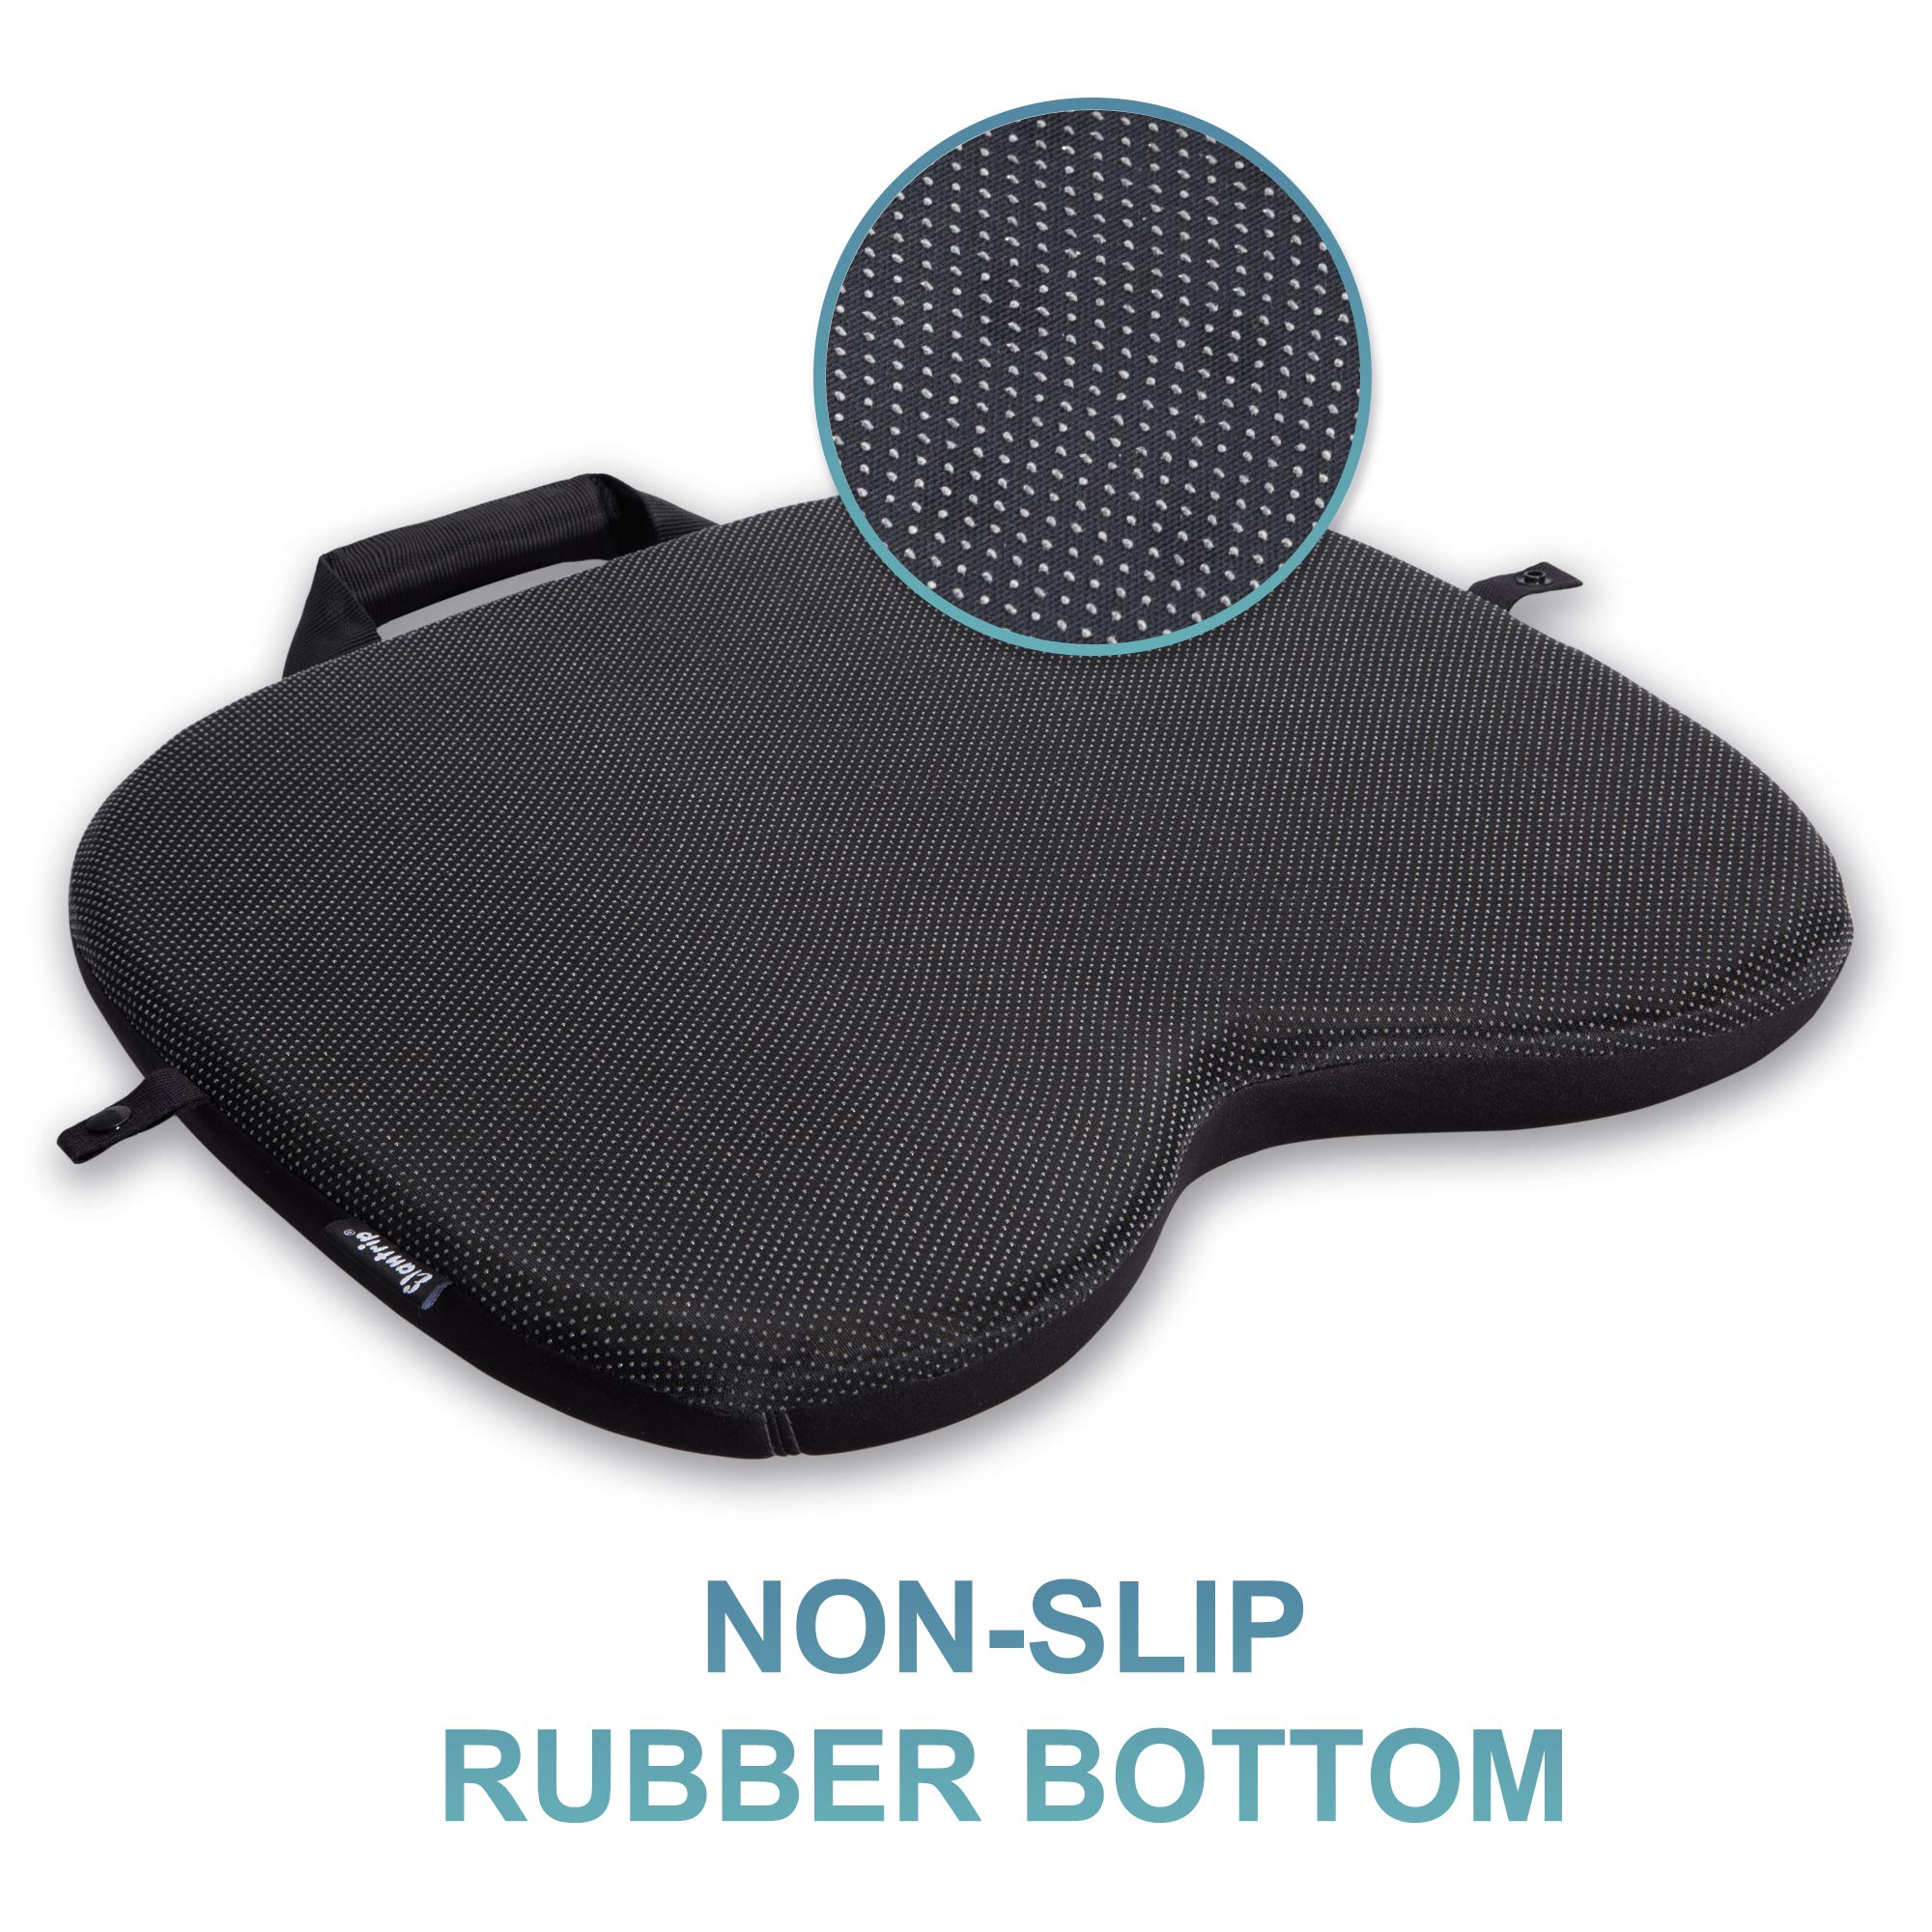 Elantrip Seat Cushion Washable Chair Pad Chair Pillow for Sciatica Coccyx Back & Tailbone Pain Relief Orthopedic,with Car Truck Office Desk Chair (Black)